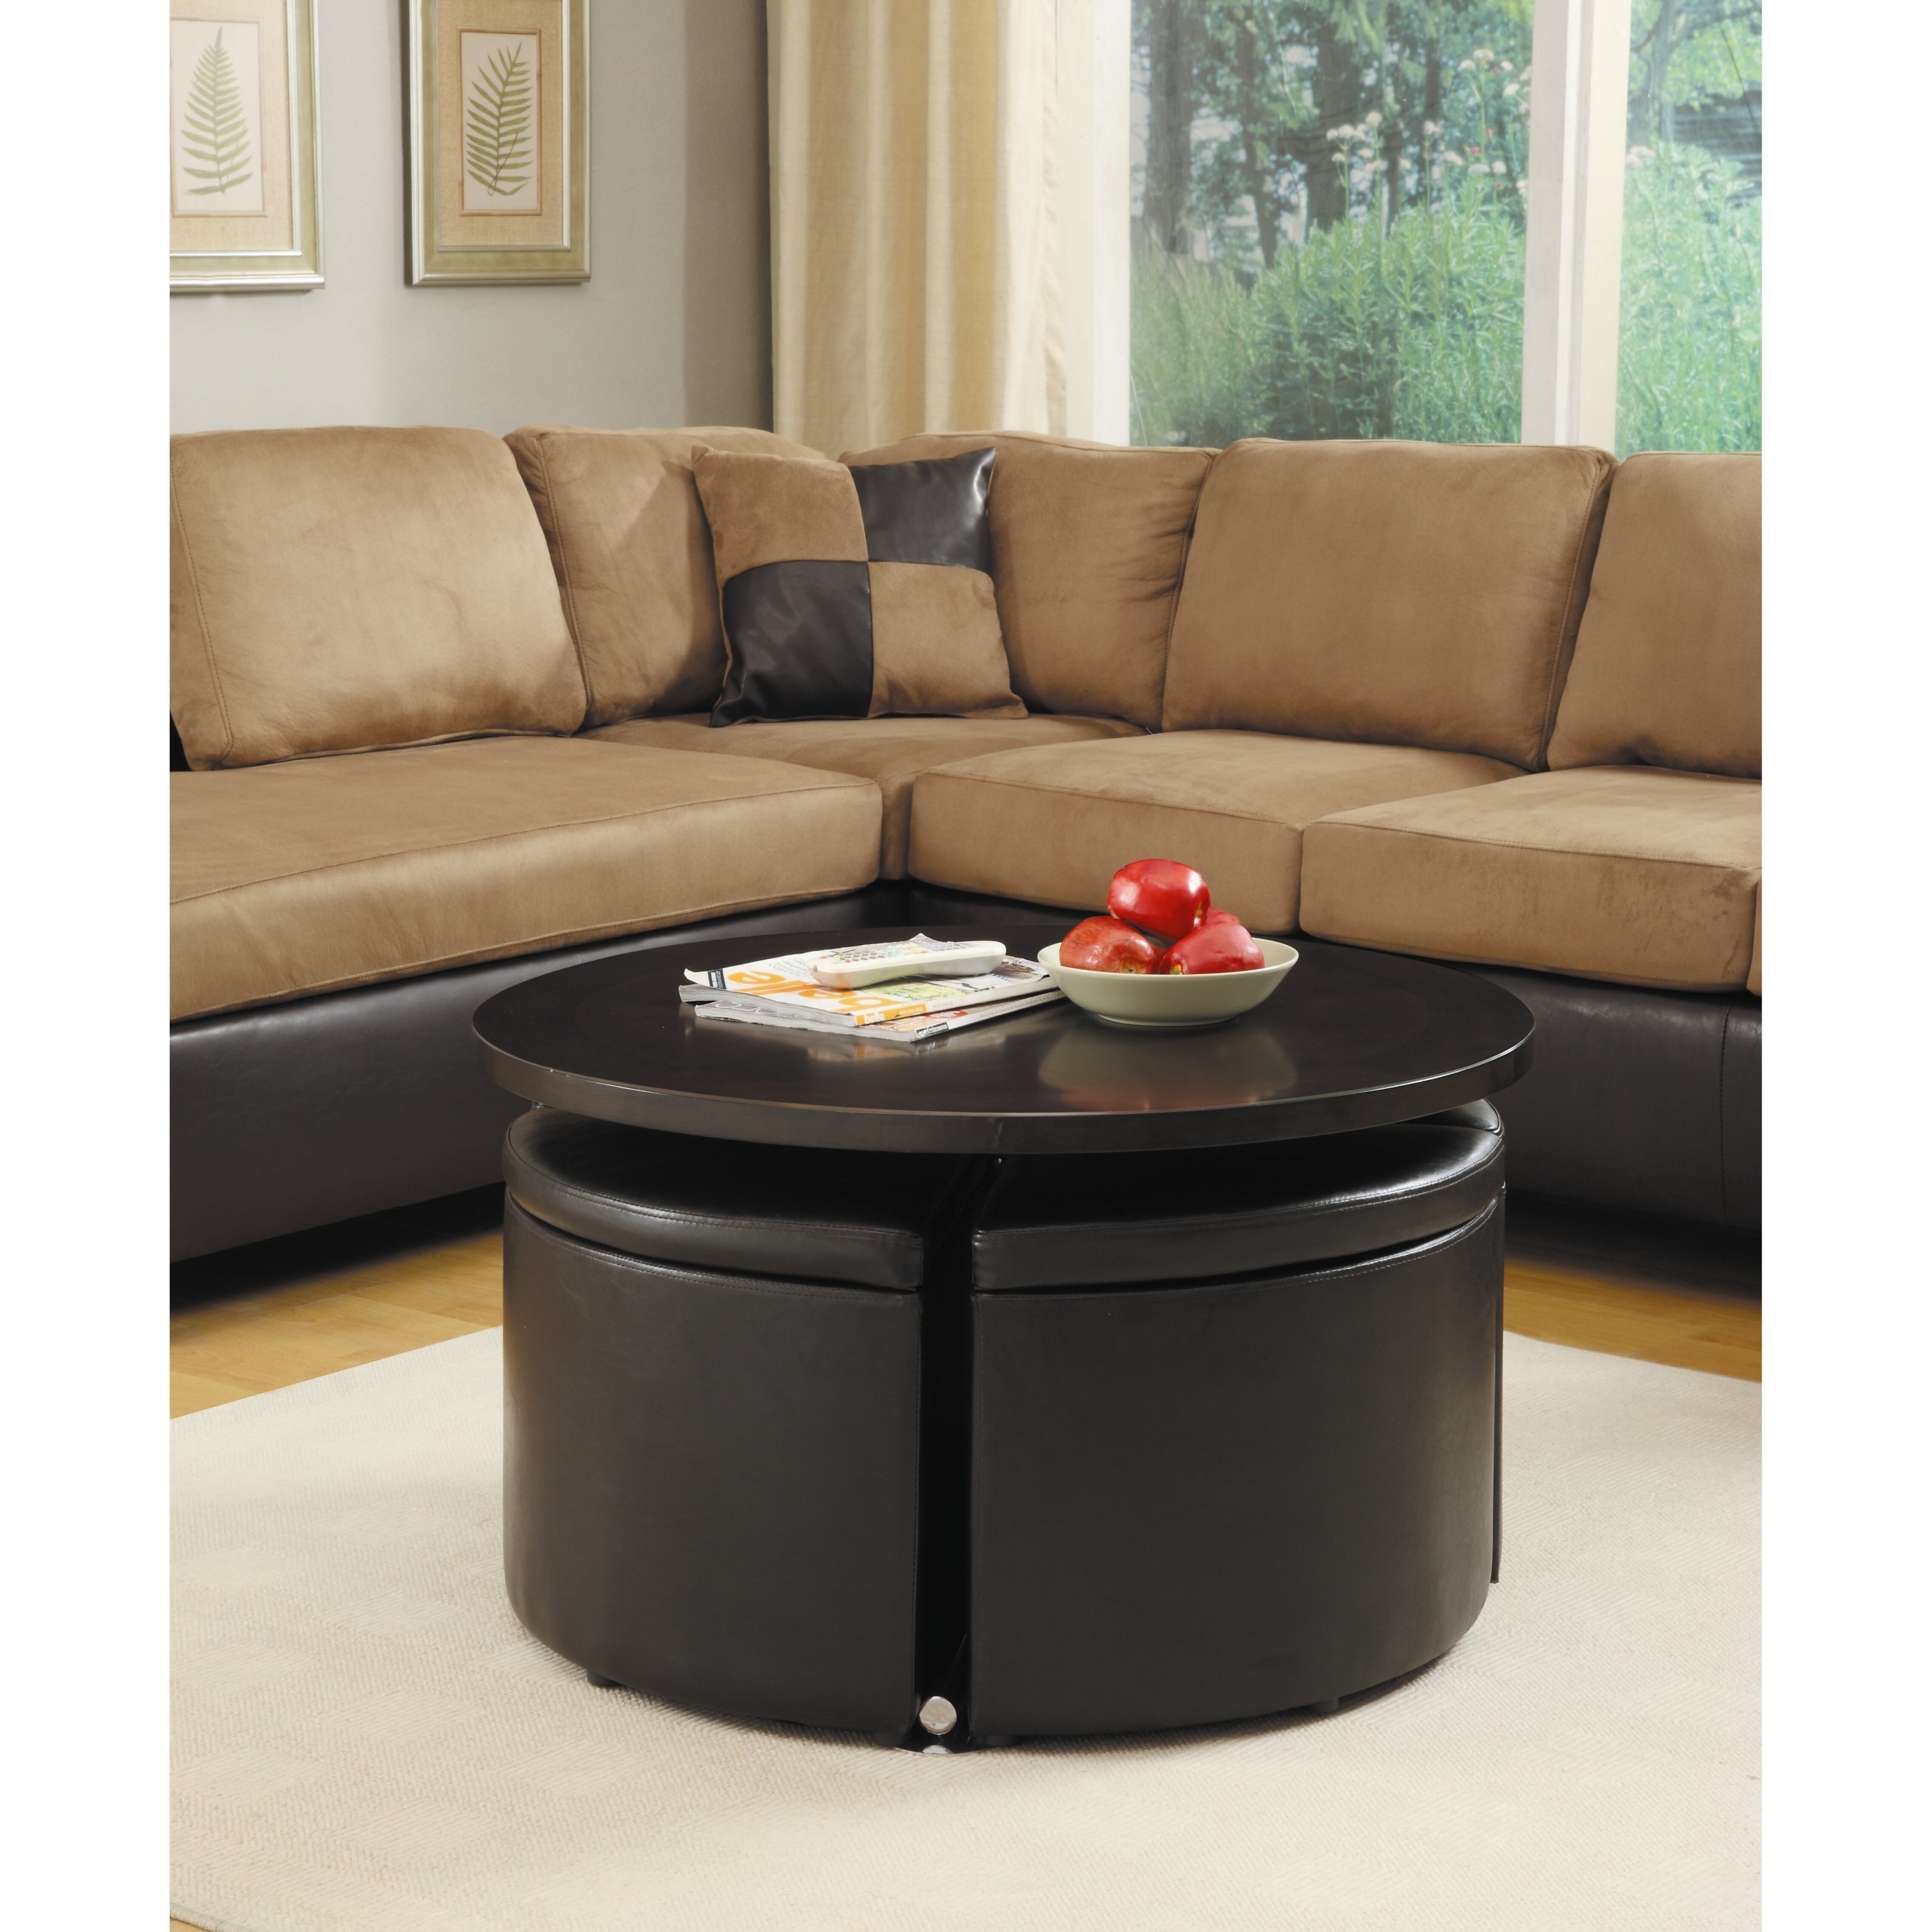 Woodbridge home designs rowley gas lift coffee table with ottomans